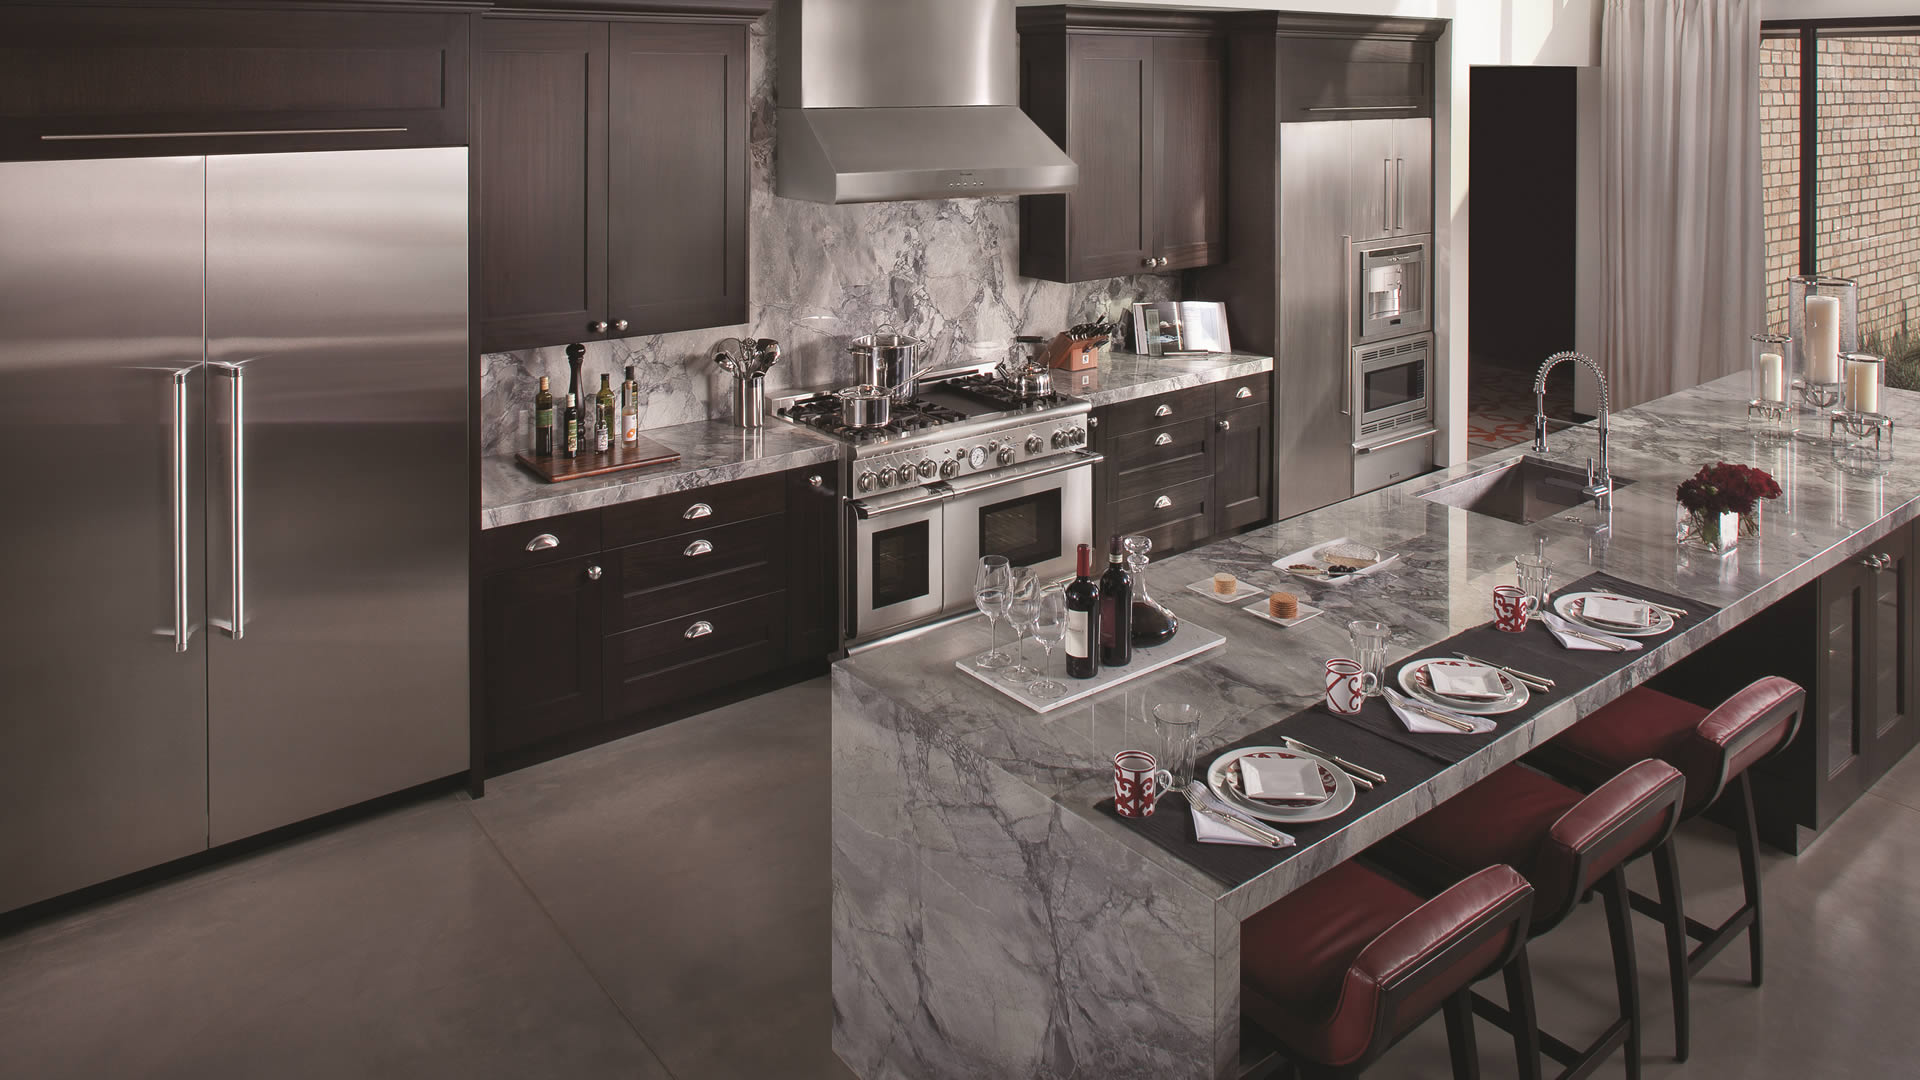 thermador | fine luxury kitchen appliances - nordic kitchens and